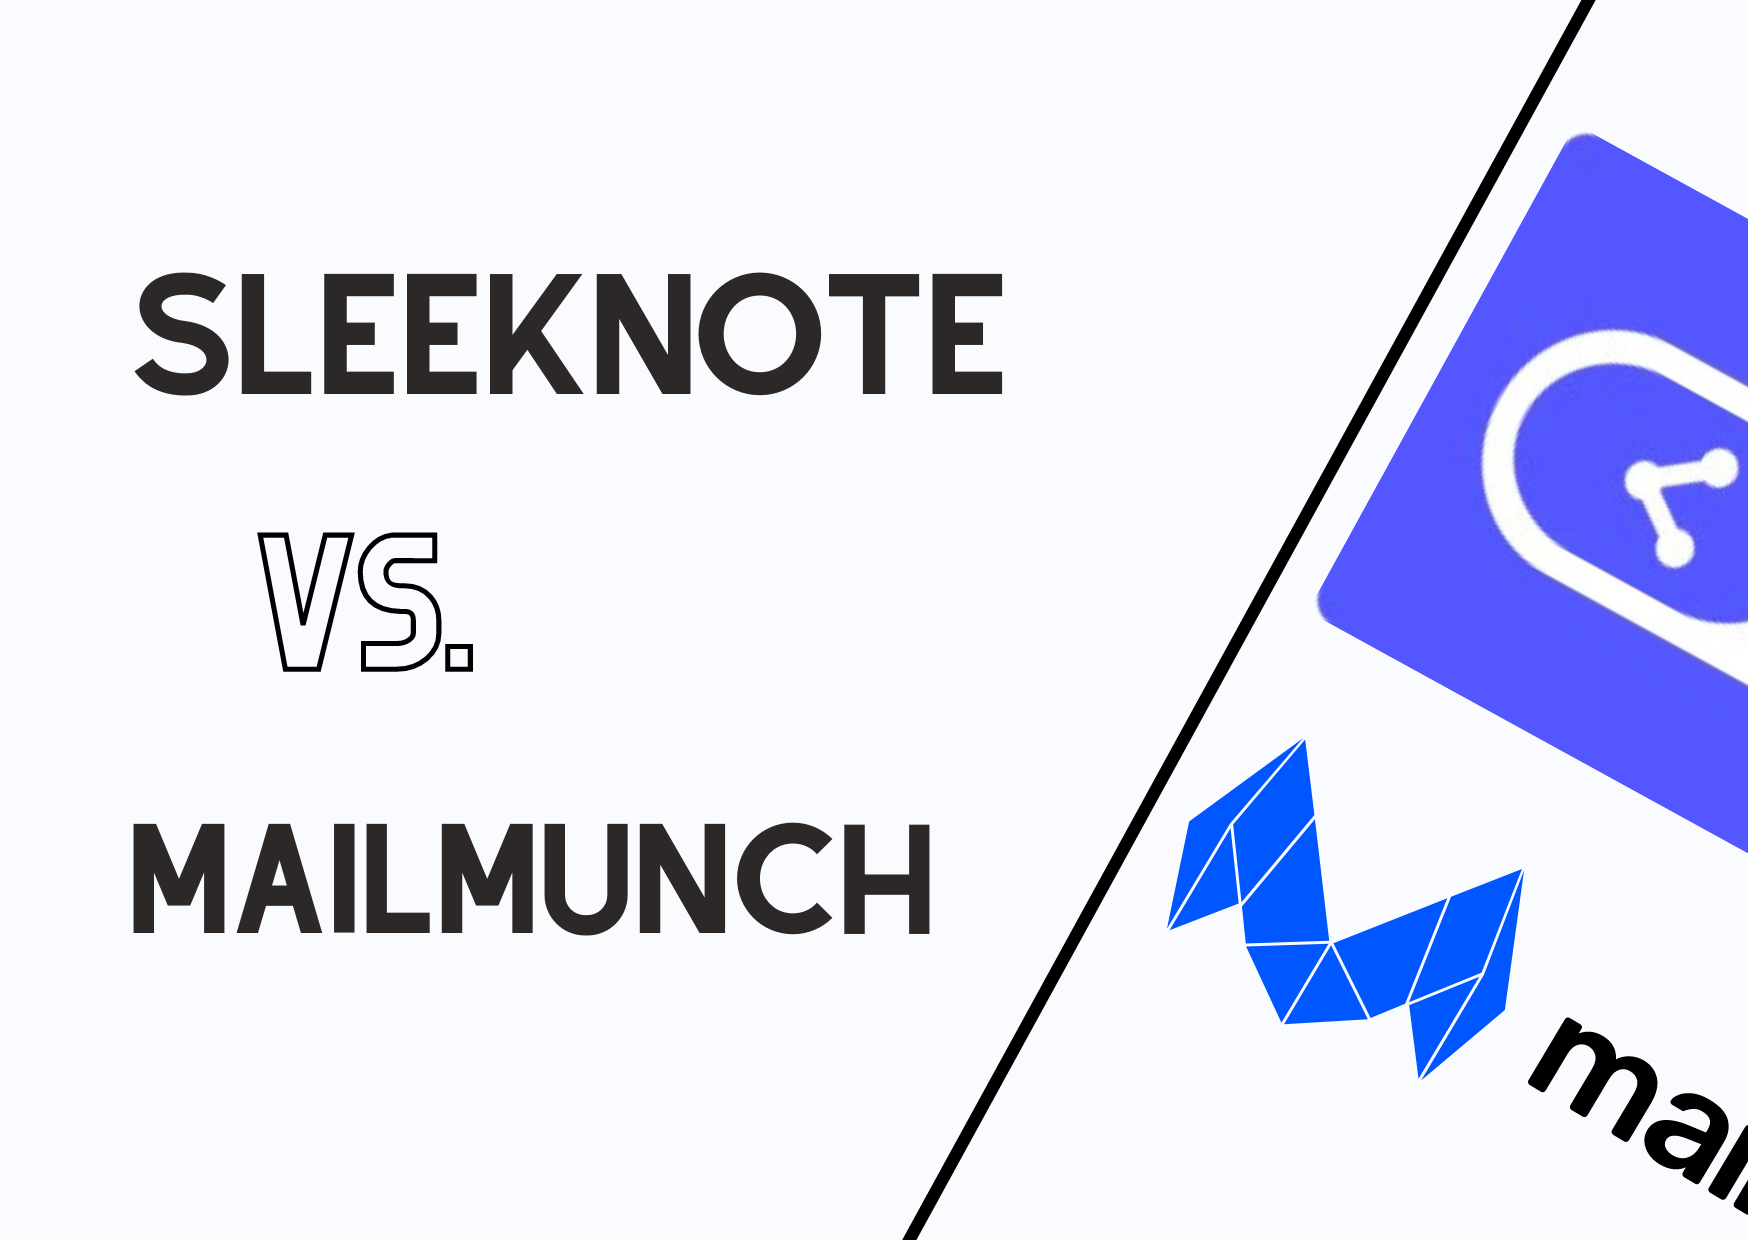 the comparison cover of Sleeknote and Mailmunch